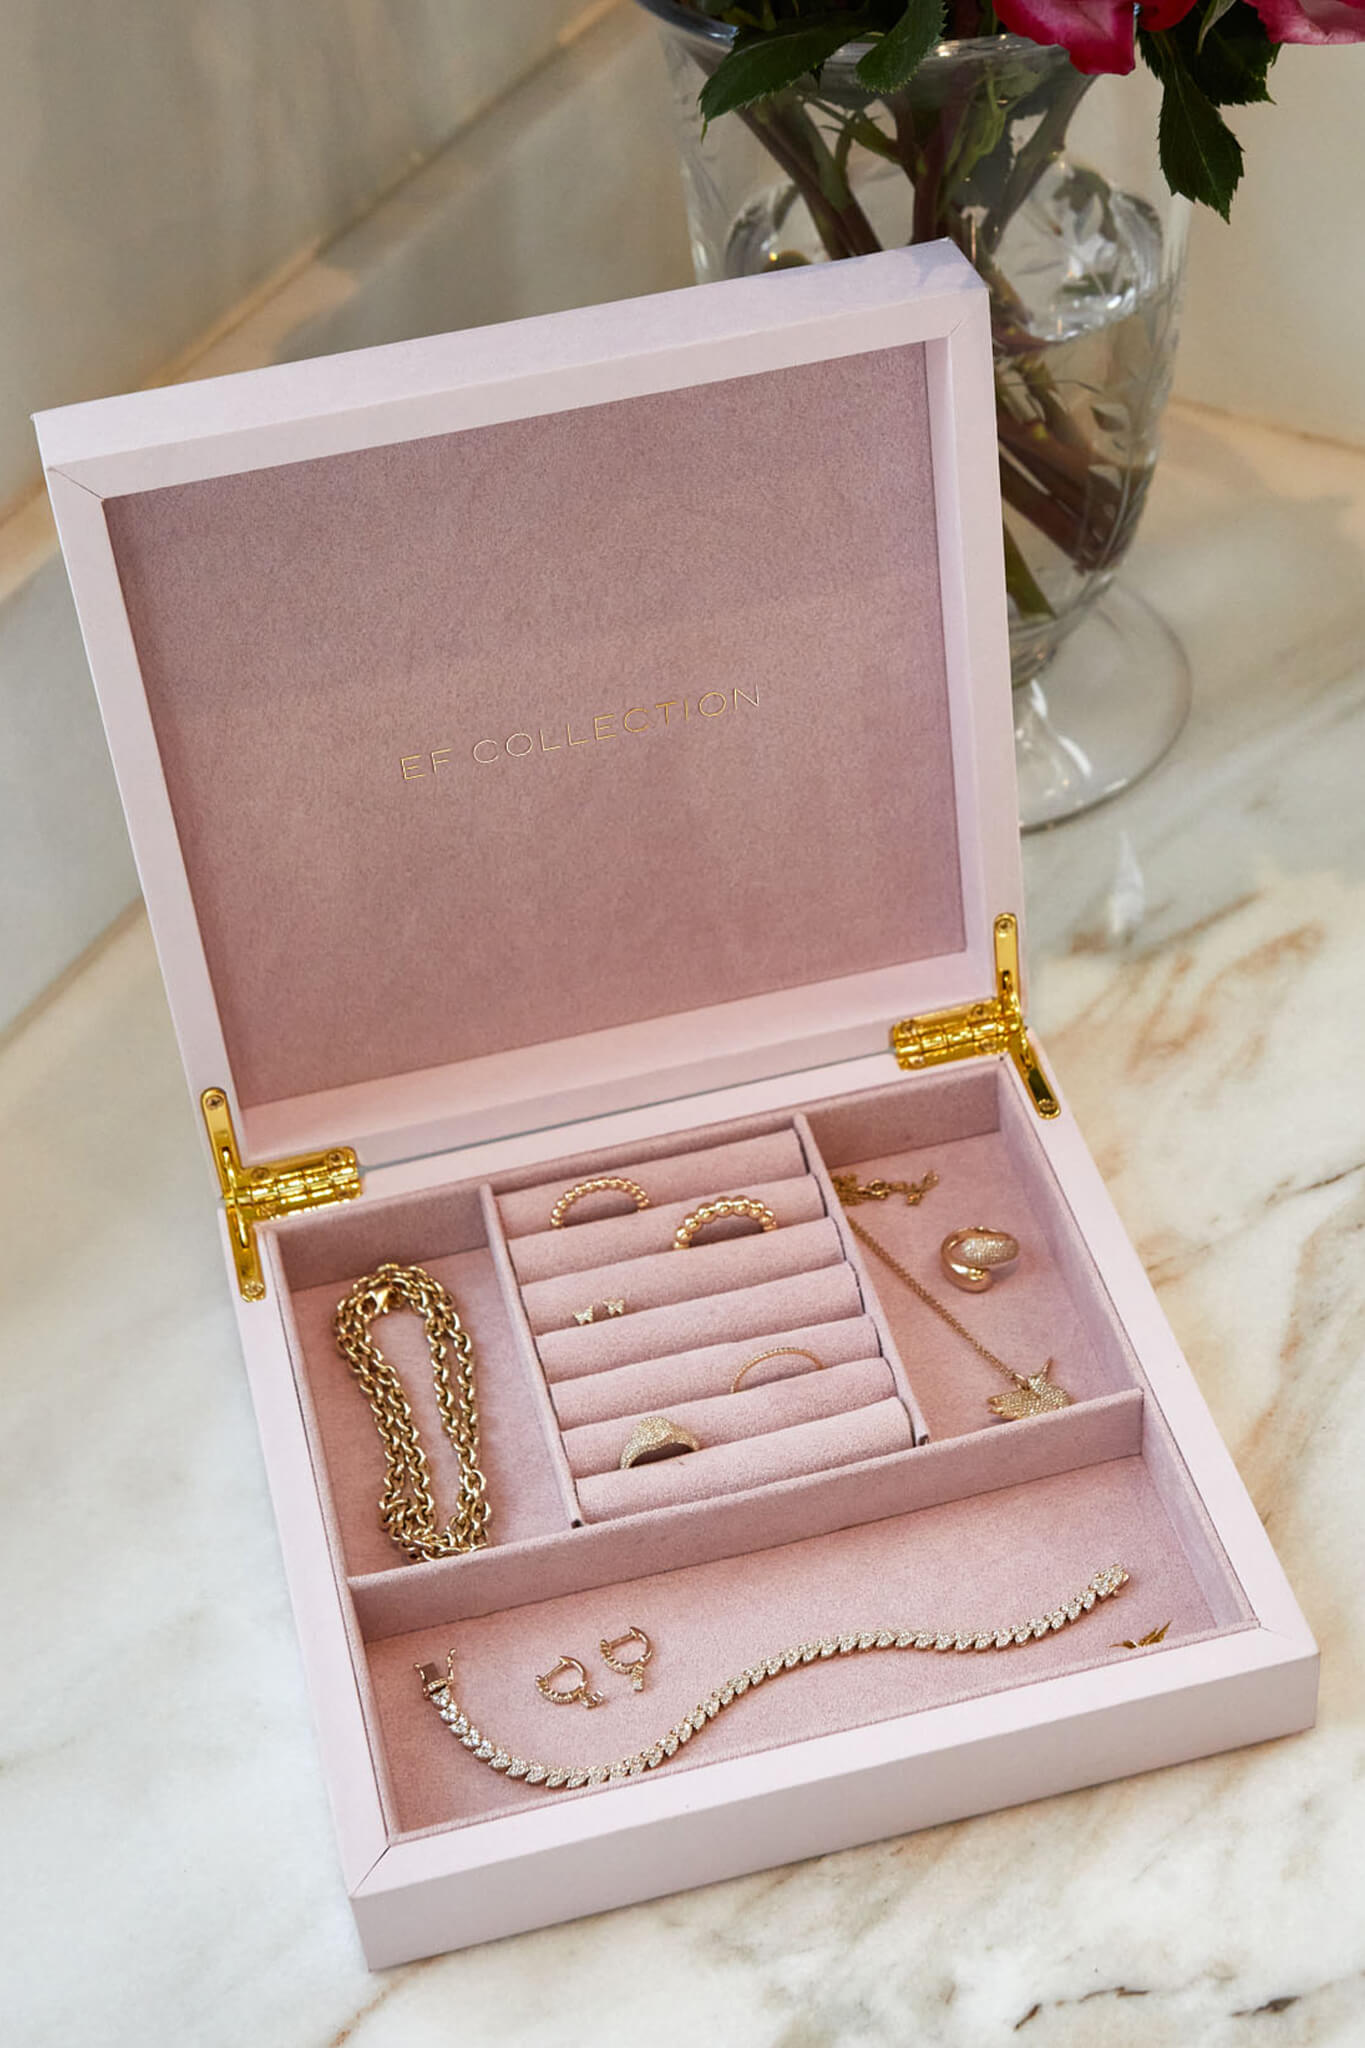 EF Collection 14k yellow gold rings, bracelets, earrings, and necklaces inside pink jewelry box